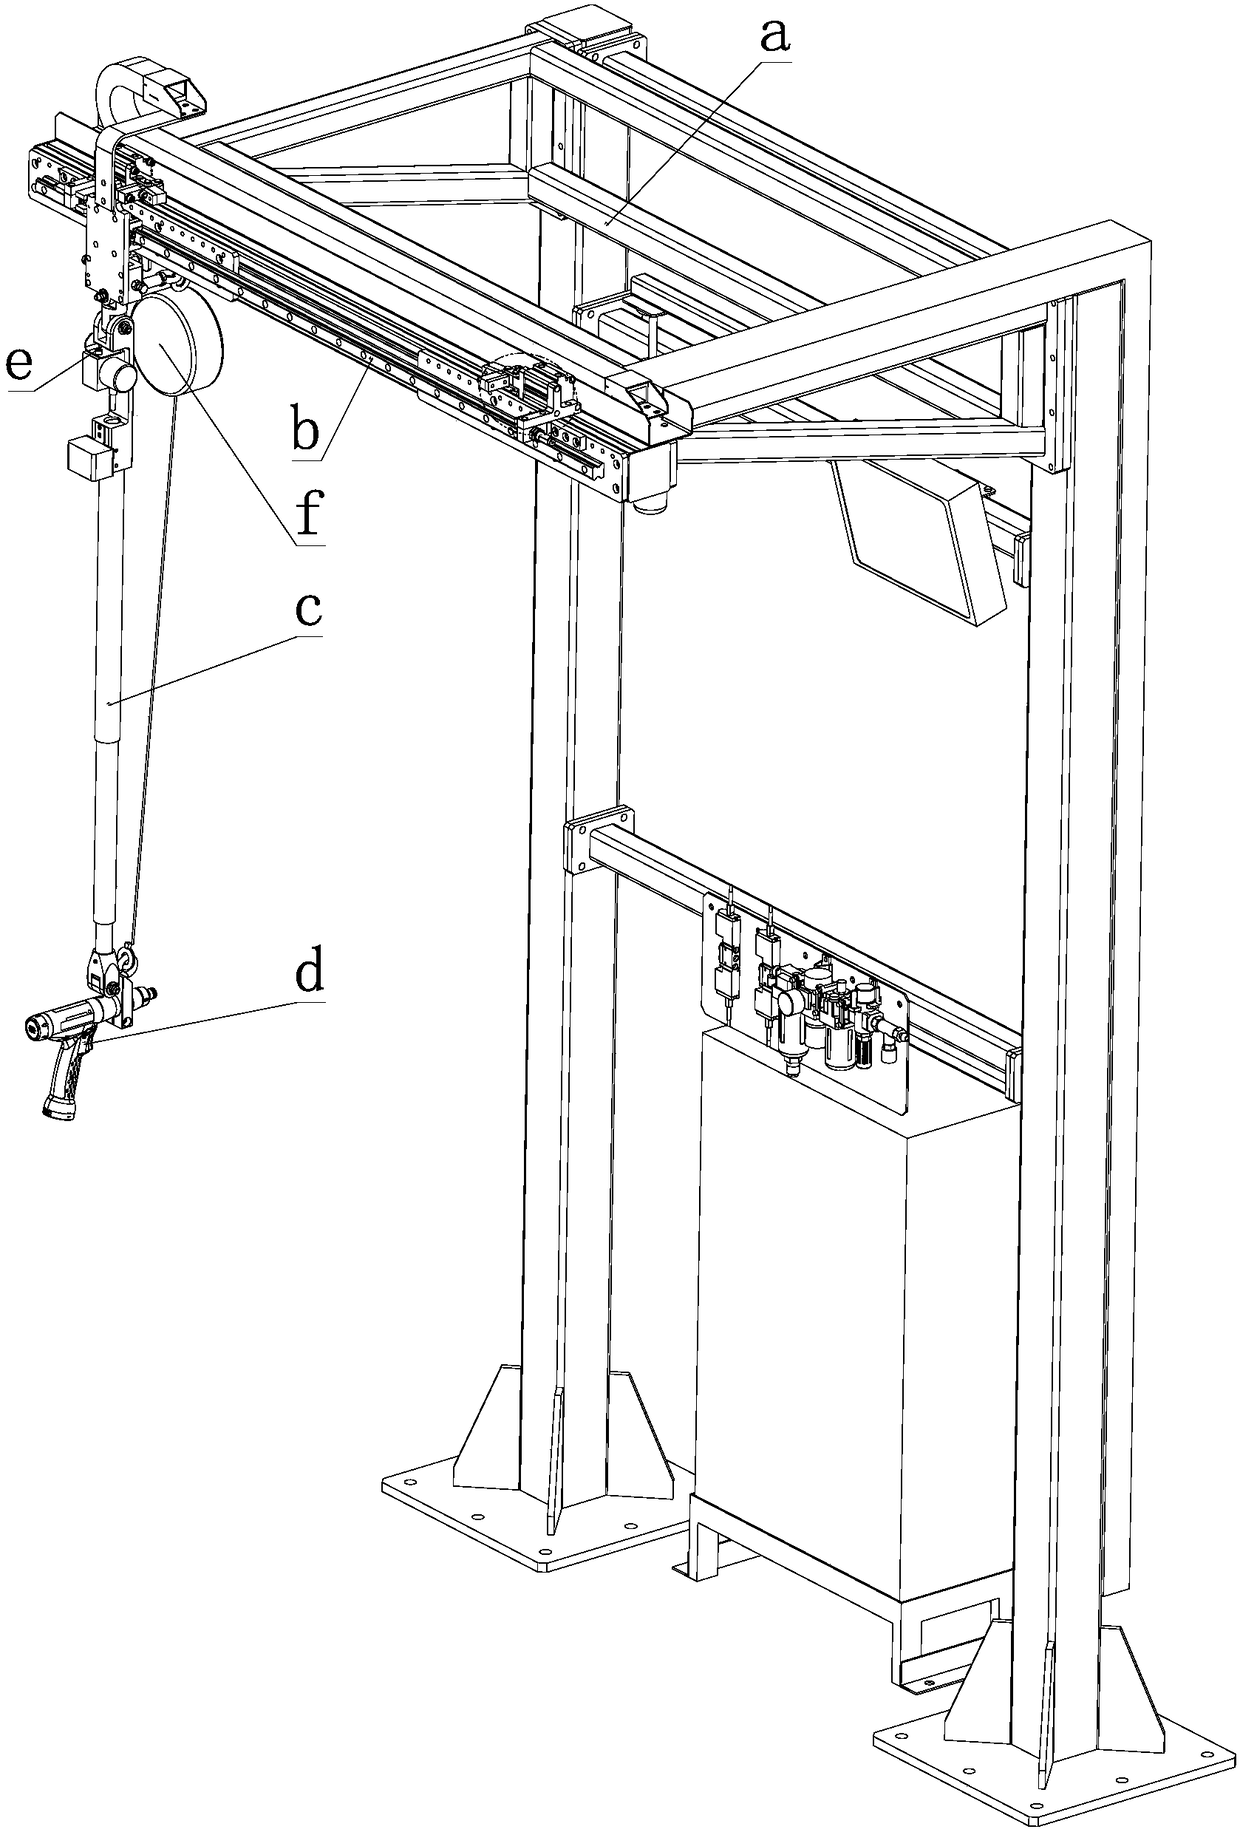 A bolt tightening device